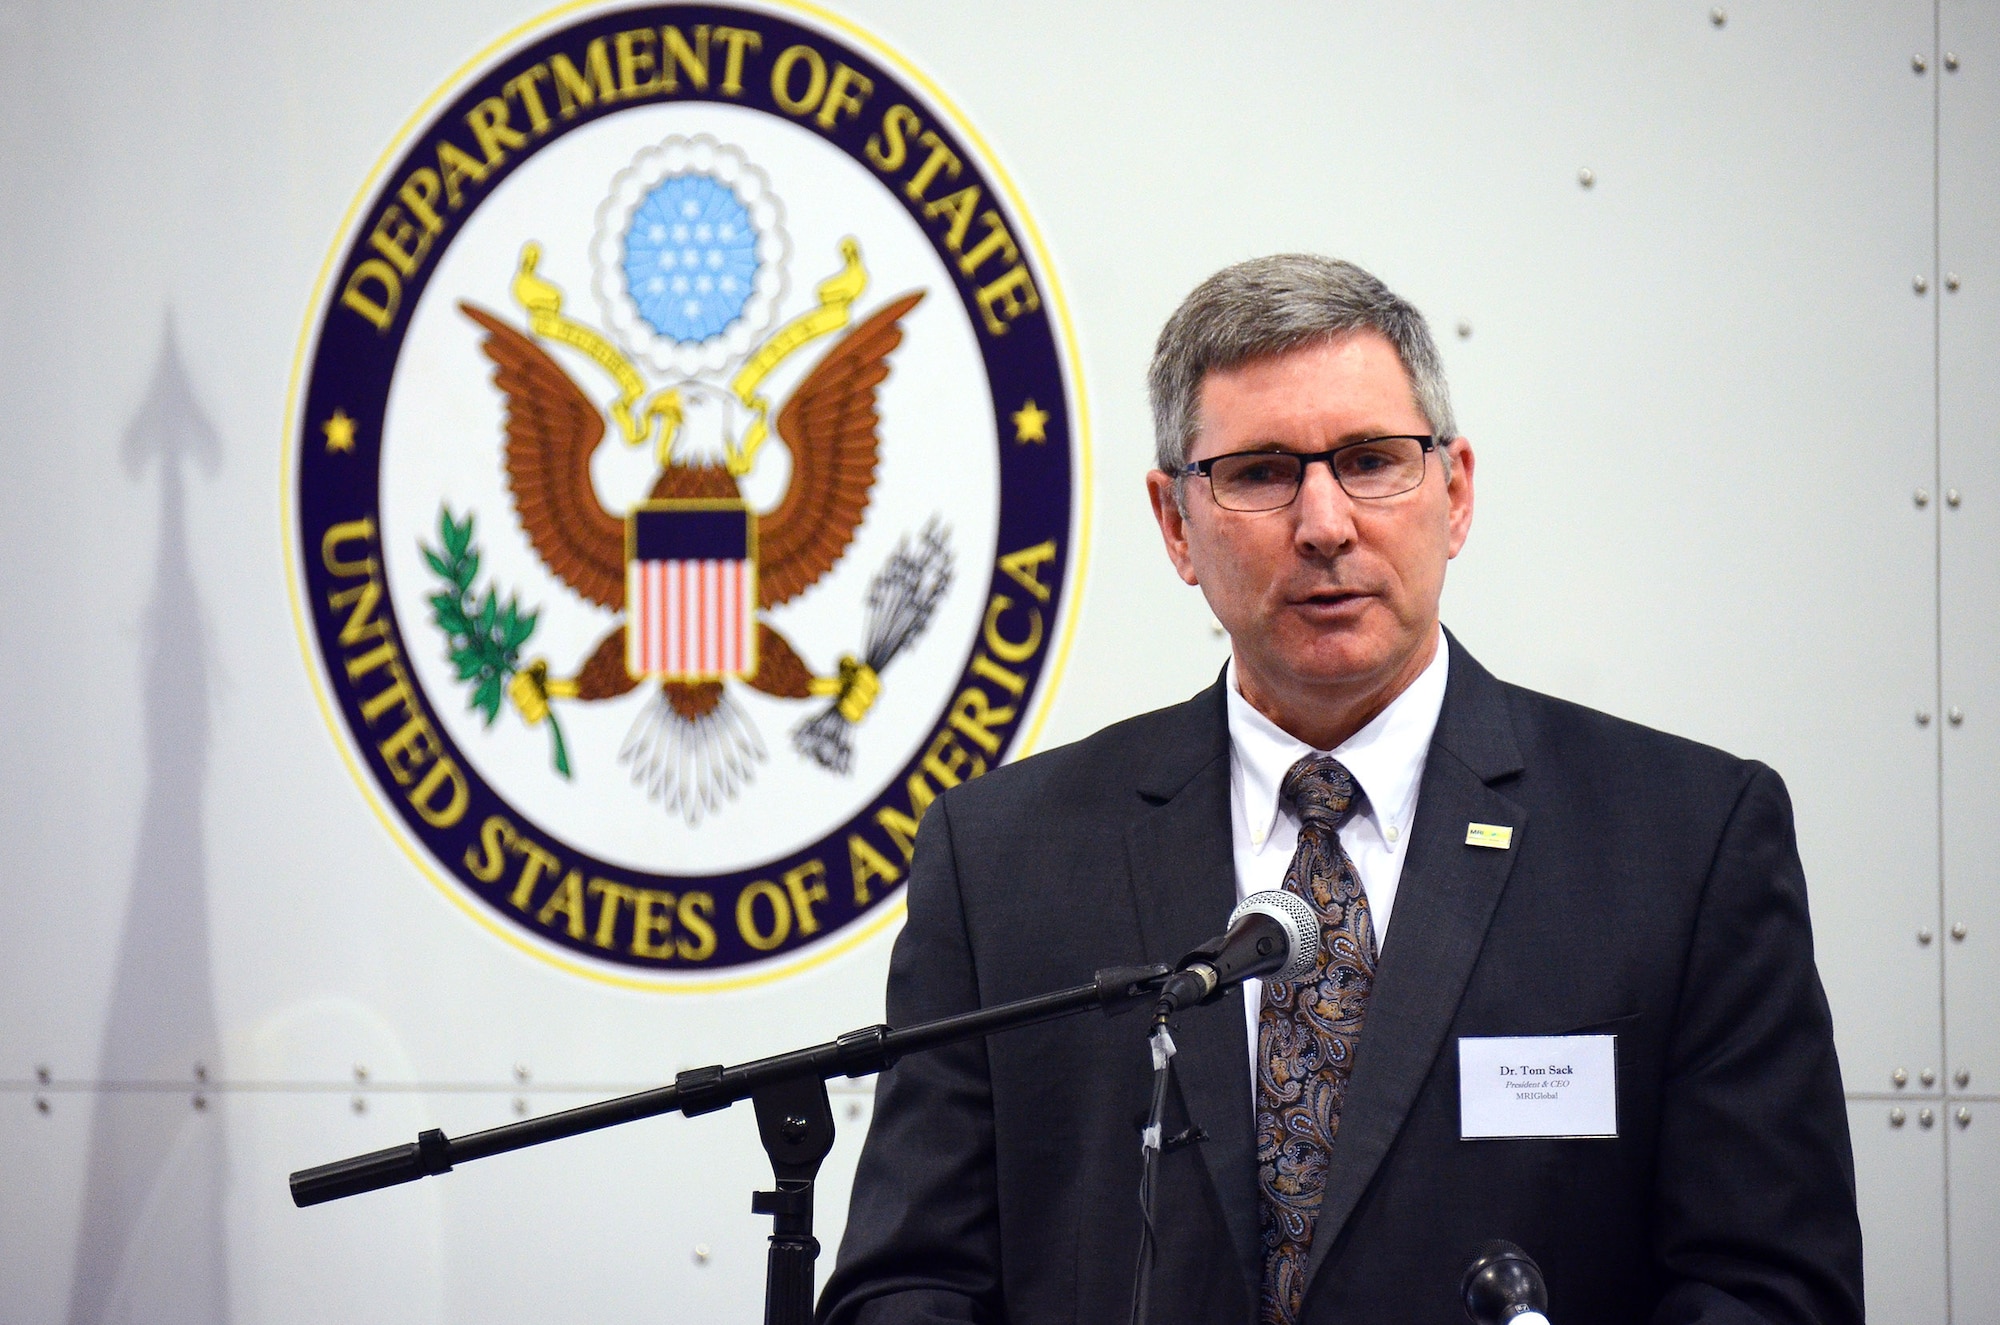 Dr. Tom Sack, president and chief executive officer MRIGlobal, gives remarks at the unveiling of the US State Department sponsored Containerized Biocontainment Systems units at Dobbins Air Reserve Base, Ga., Aug. 11, 2015. The two Containerized Biocontainment units built by MRIGlobal through a partnership with the U.S. State Dept. and the Paul G. Allen Ebola Program, will be positioned at Dobbins ARB, ready for future. (U.S. Air Force photo/ Brad Fallin)